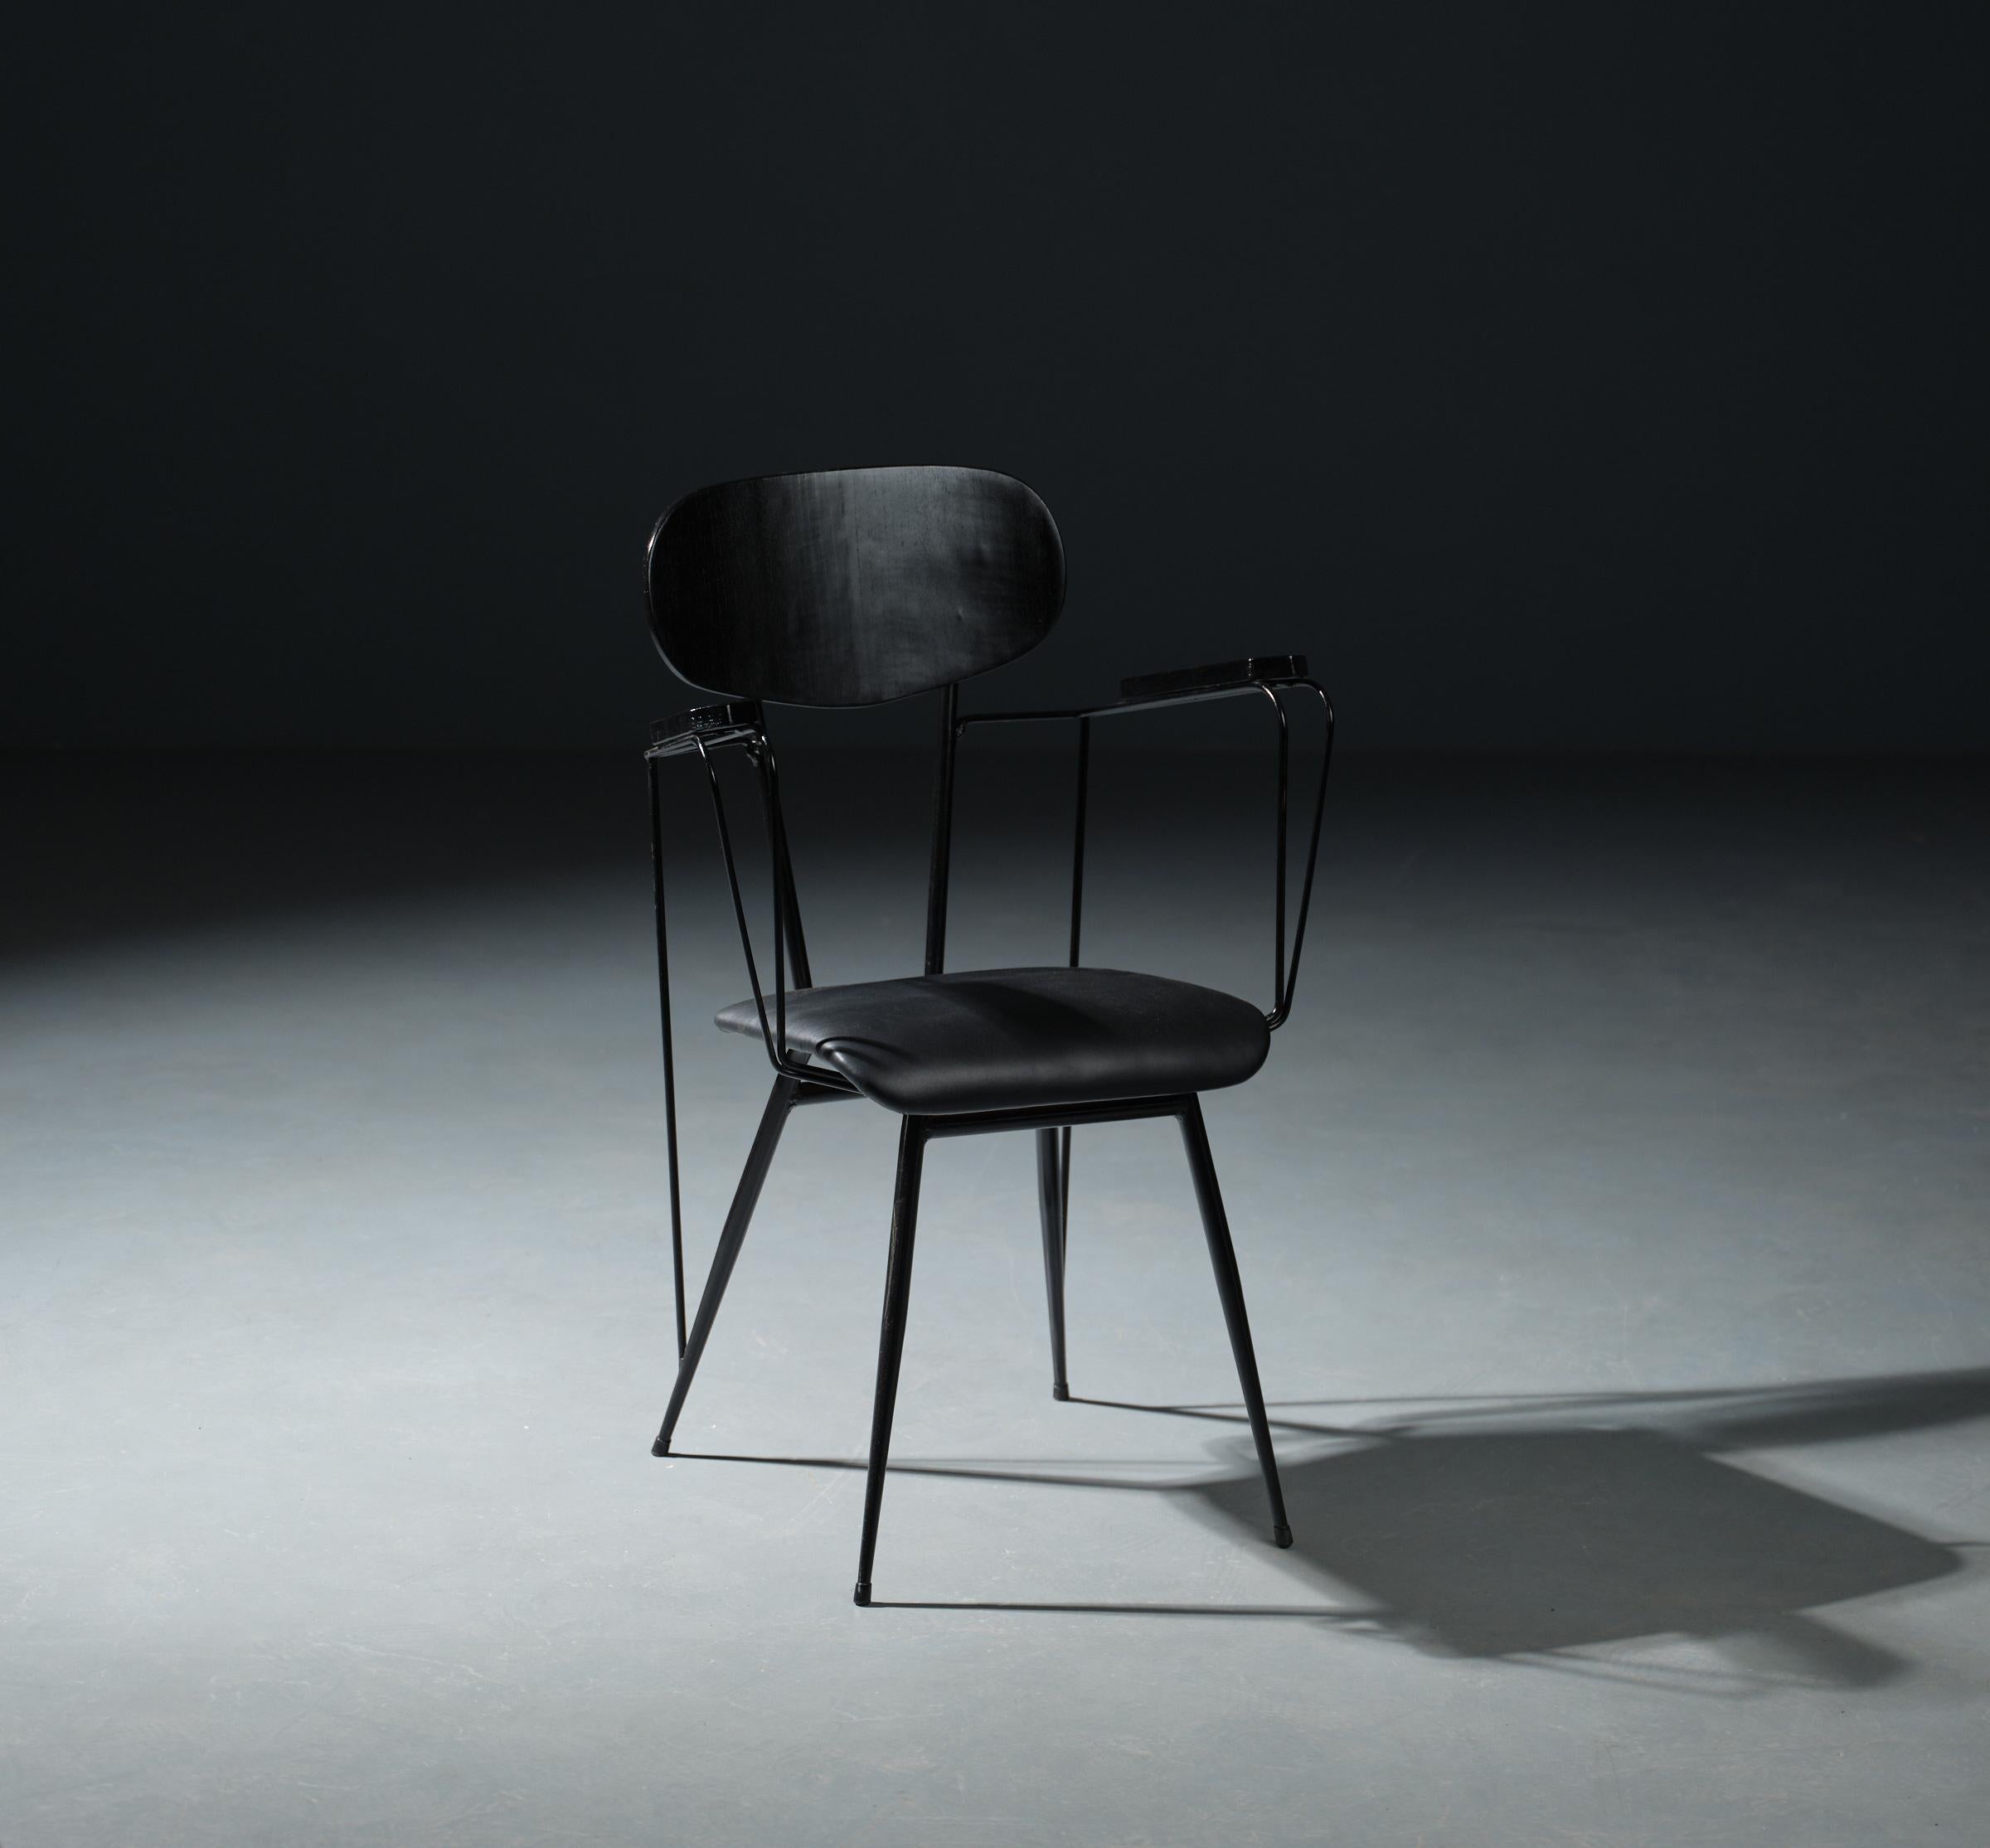 Introducing a rare find from the 1950s, this desk chair embodies iconic Italian design. Crafted with a black lacquered iron frame and tapered legs featuring a unique compass opening, it exudes elegance and sophistication. The seat and backrest are